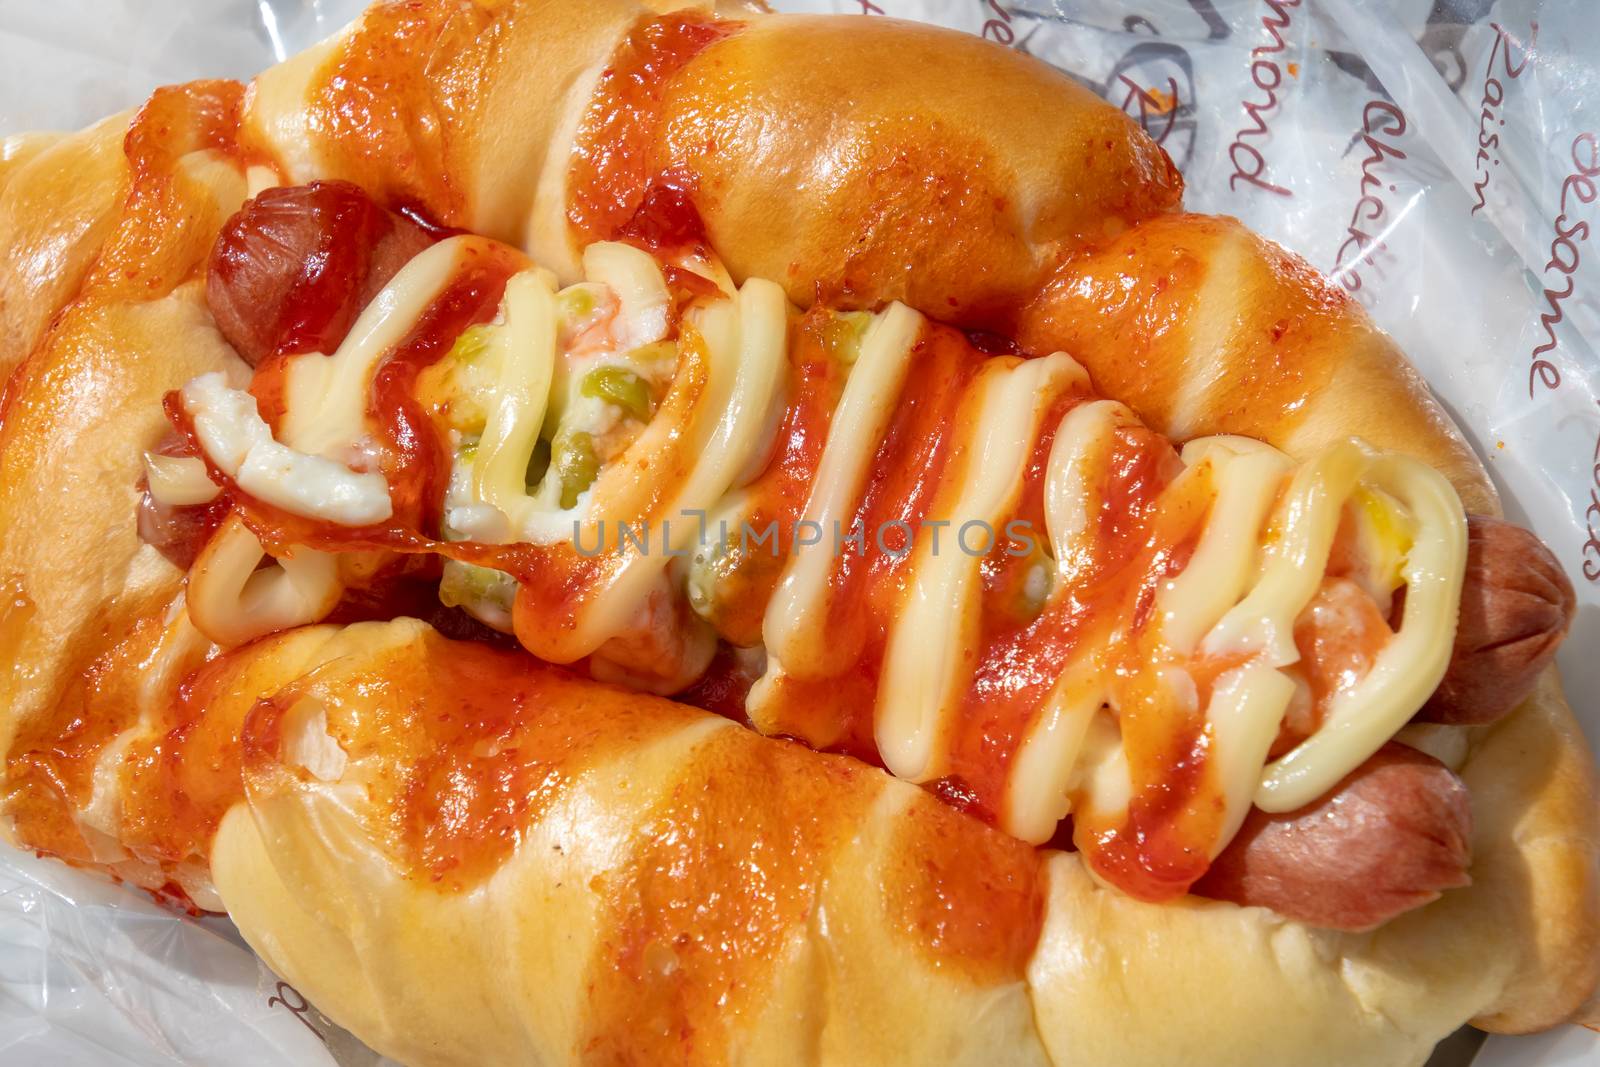 Baked hot dog served with pepperoni and sauces by MXW_Stock